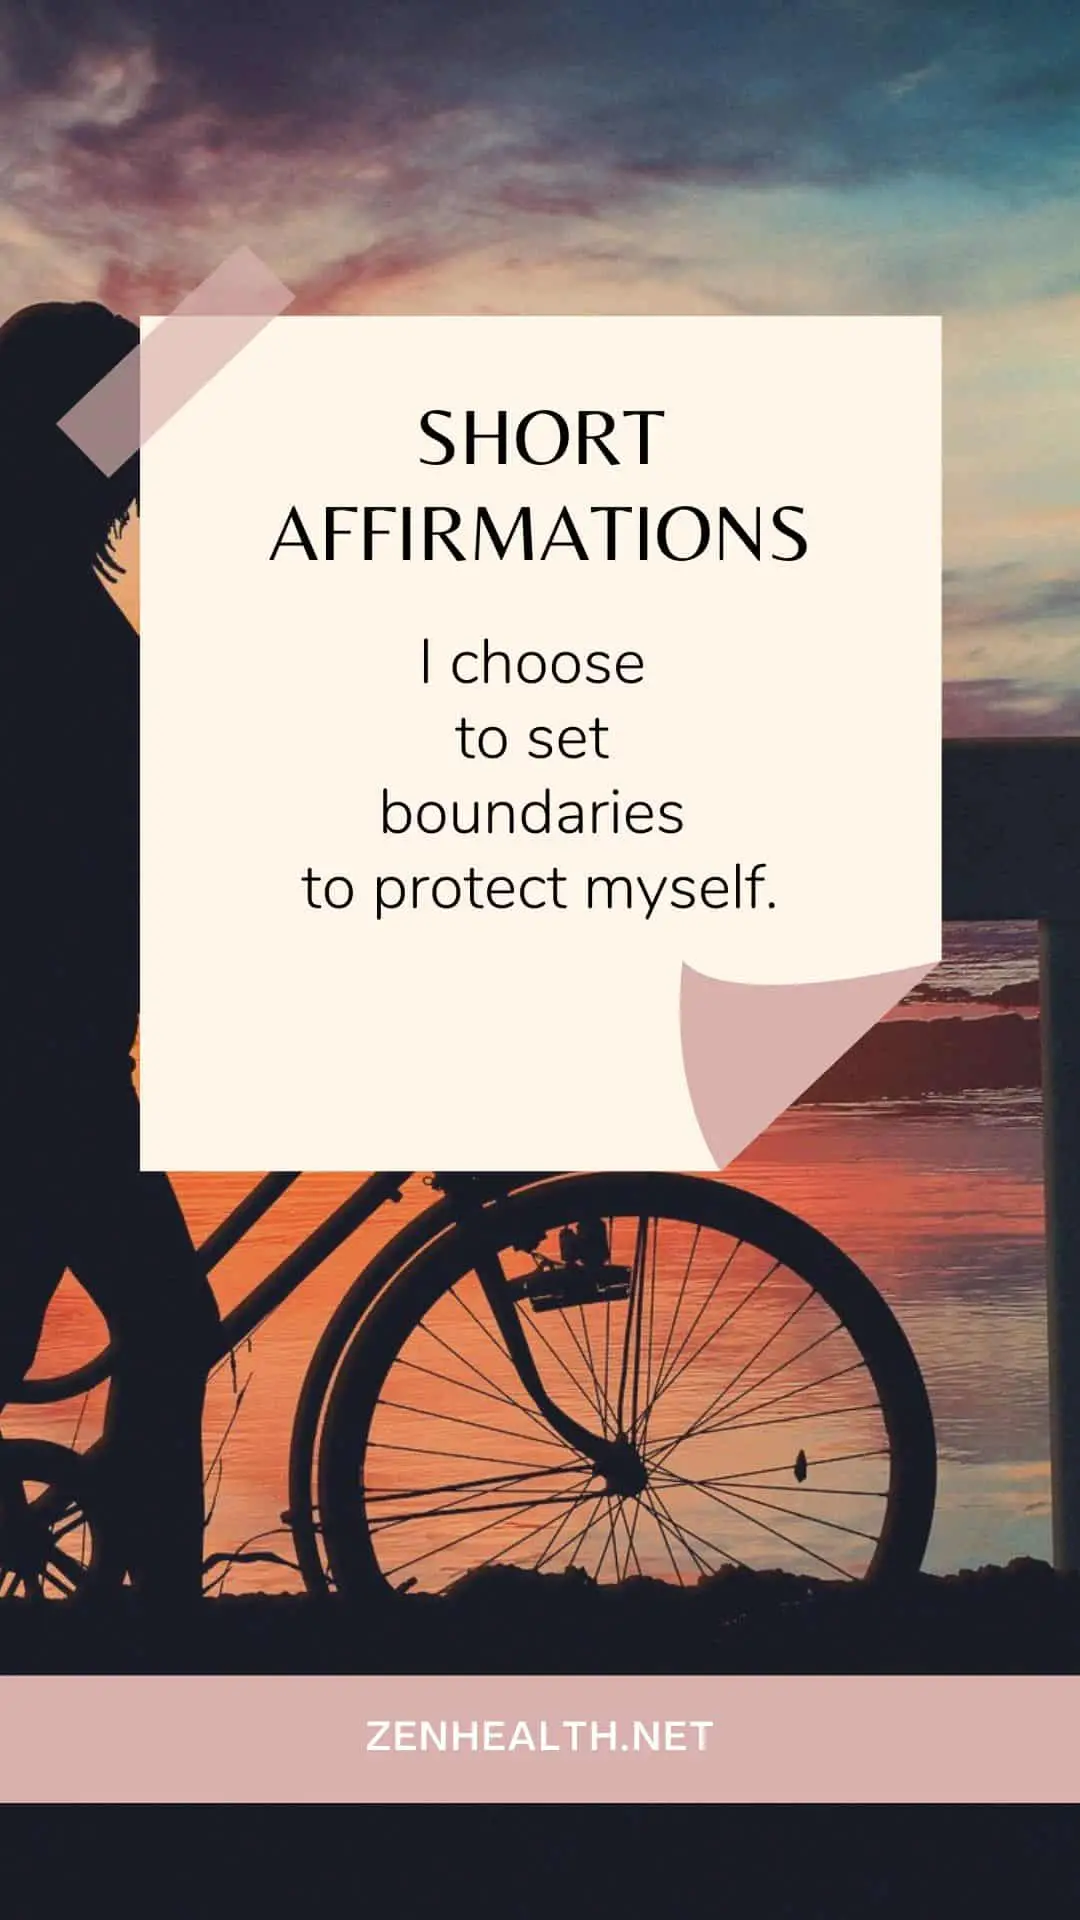 short affirmations: I choose to set boundaries to protect myself